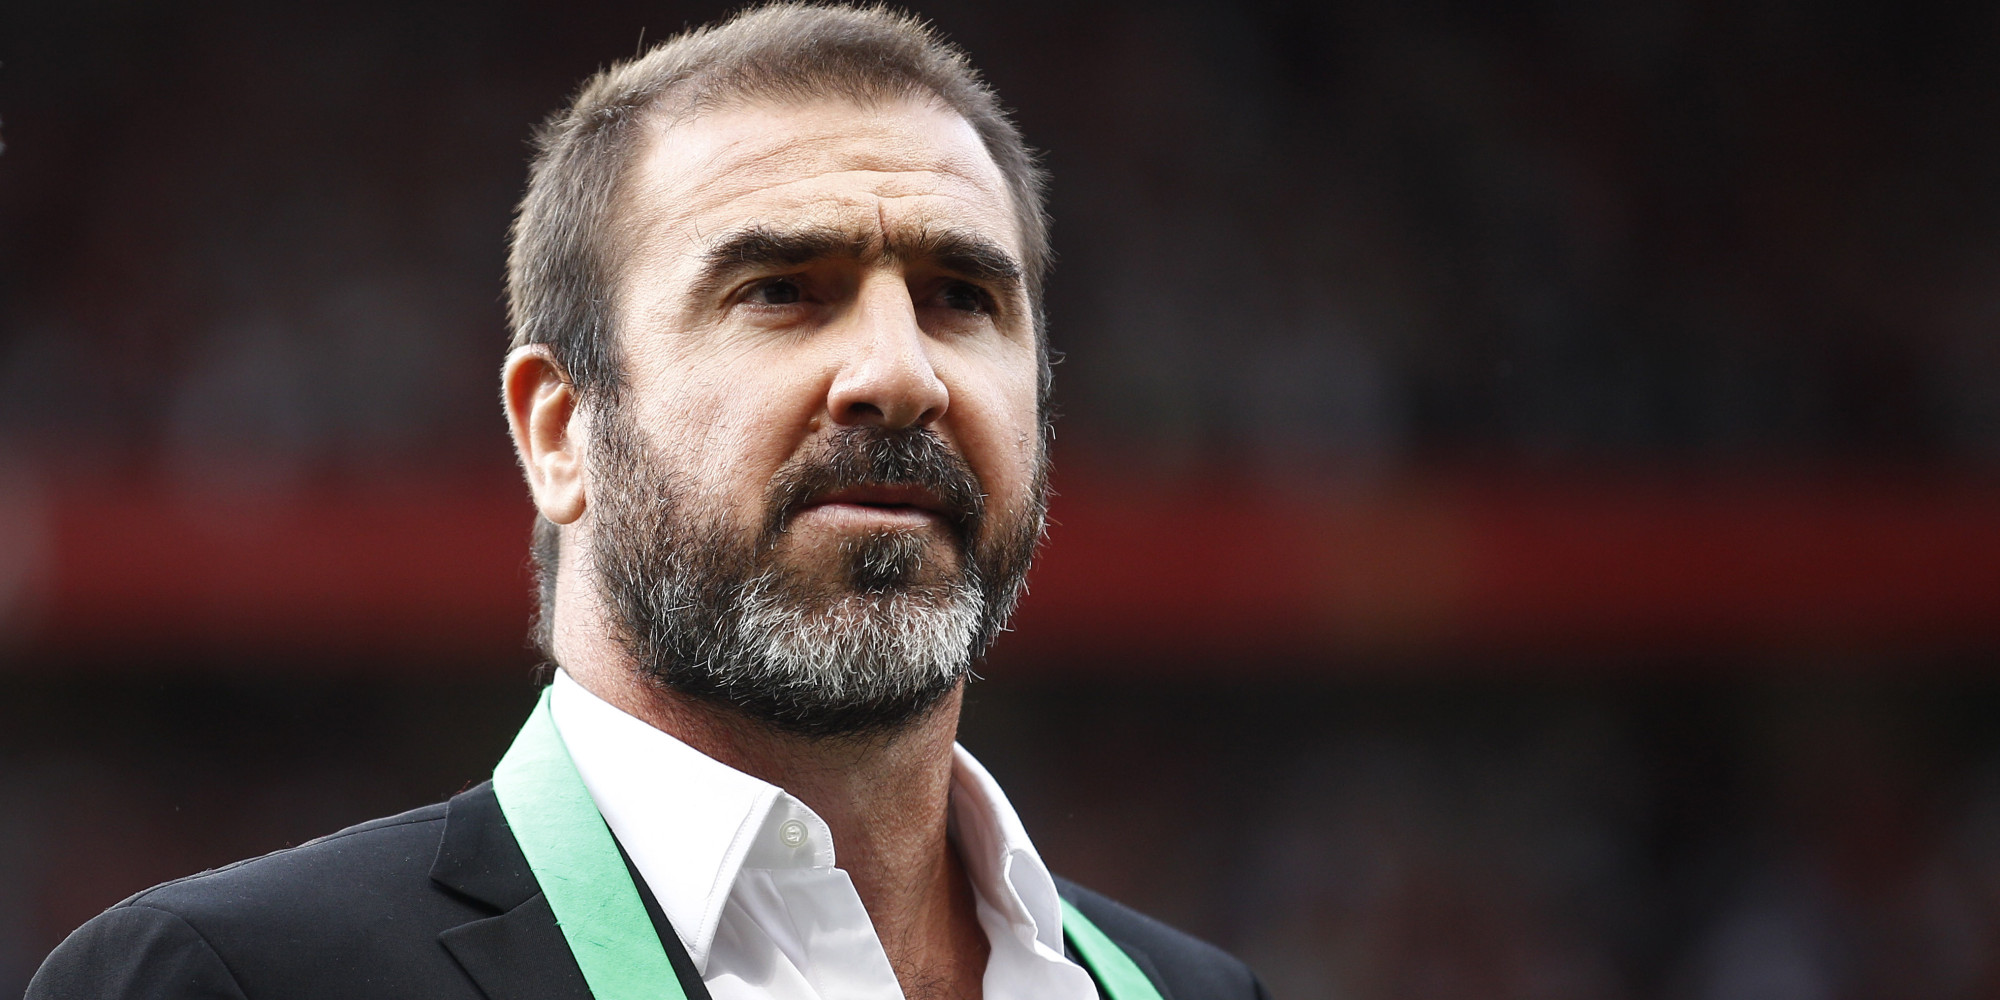 New York Cosmos manager Eric Cantona stands on the pitch before a testimonial soccer match for former Manchester United player Paul Scholes at Old Trafford Stadium, Manchester, England, Friday Aug. 5, 2011. (AP Photo/Jon Super) NO INTERNET/MOBILE USAGE WITHOUT FOOTBALL ASSOCIATION PREMIER LEAGUE(FAPL)LICENCE. EMAIL info@football-dataco.com FOR DETAILS.